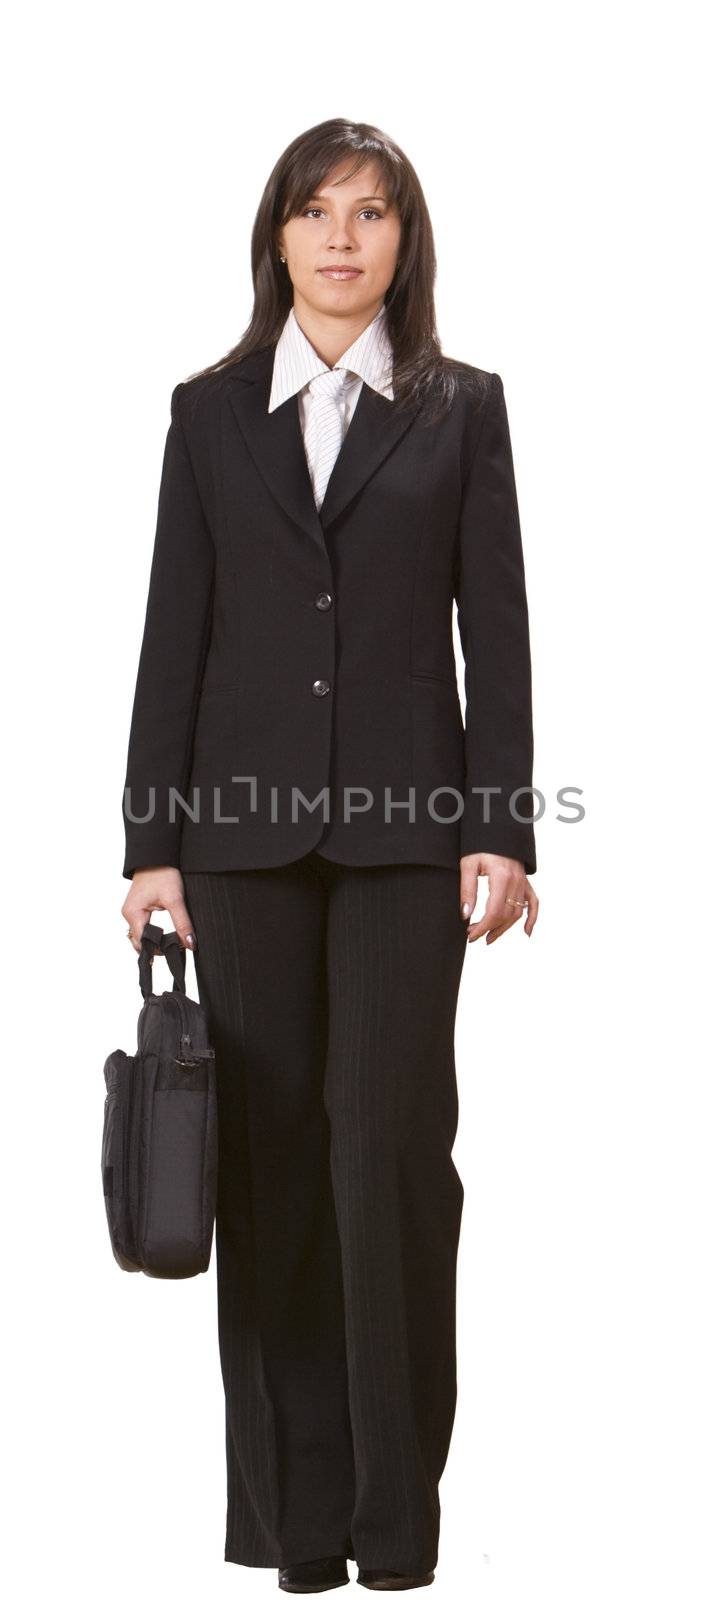 Image of a businesswoman against a white background.